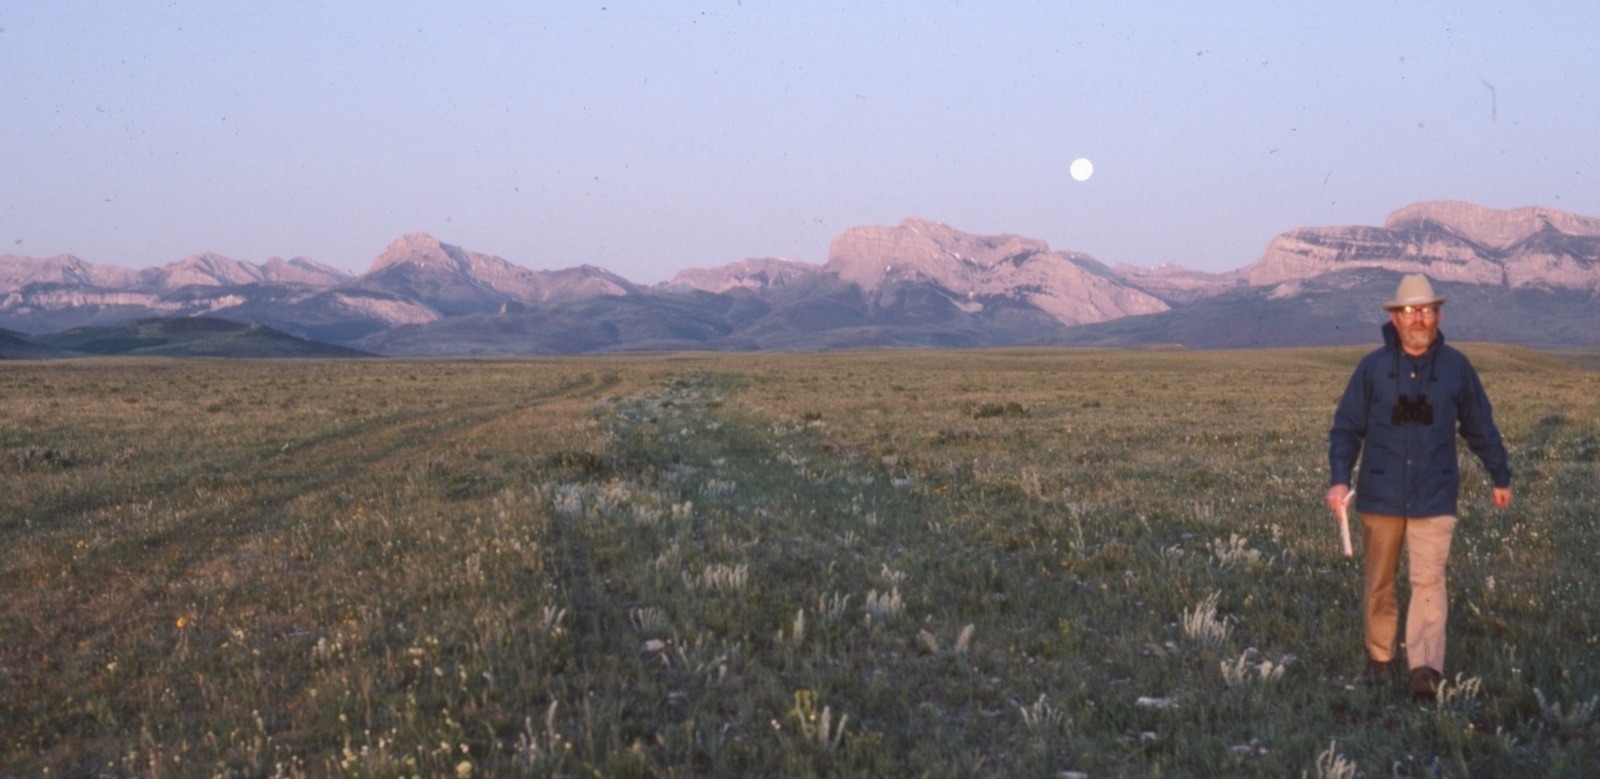 Doig pacing off shadow at dawn along the Rocky Mountain Front. Photo by Carol Doig, courtesy MSU Library Doig Collection